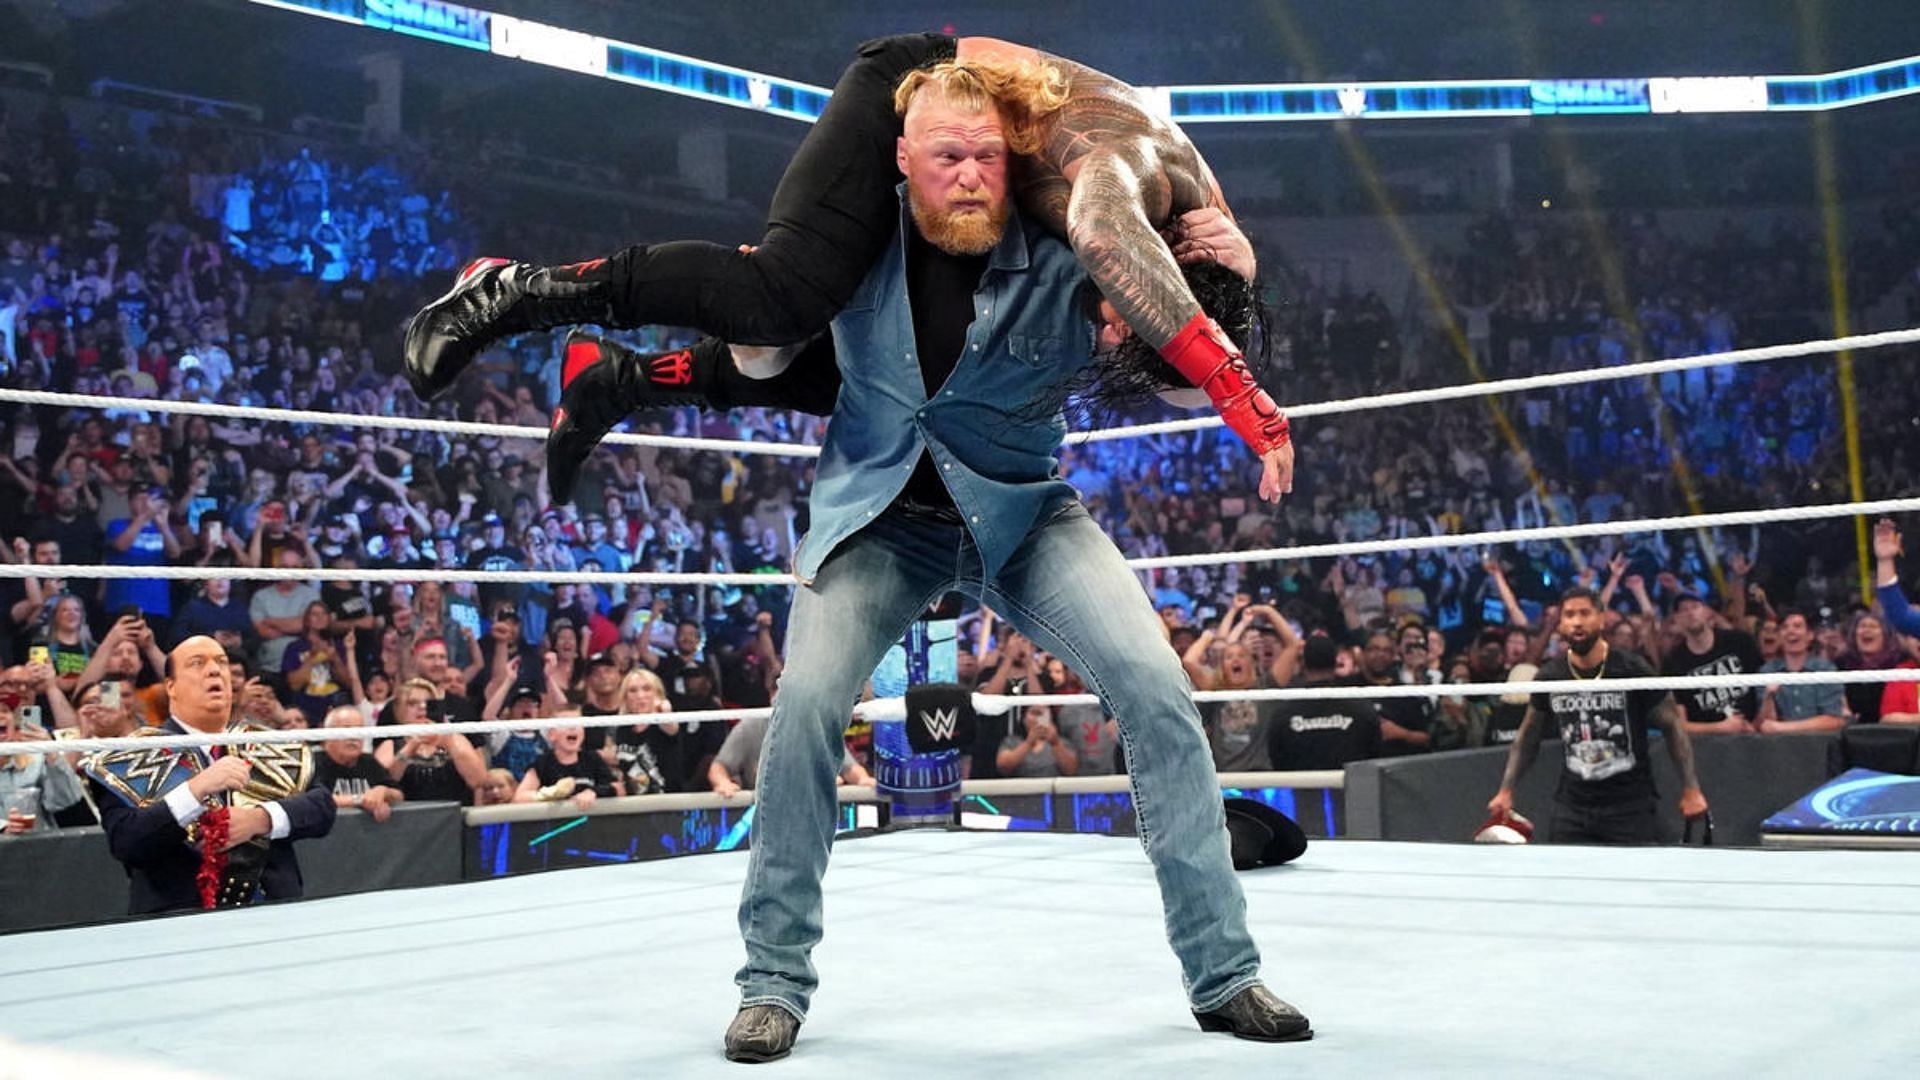 Brock Lesnar and Roman Reigns on WWE SmackDown